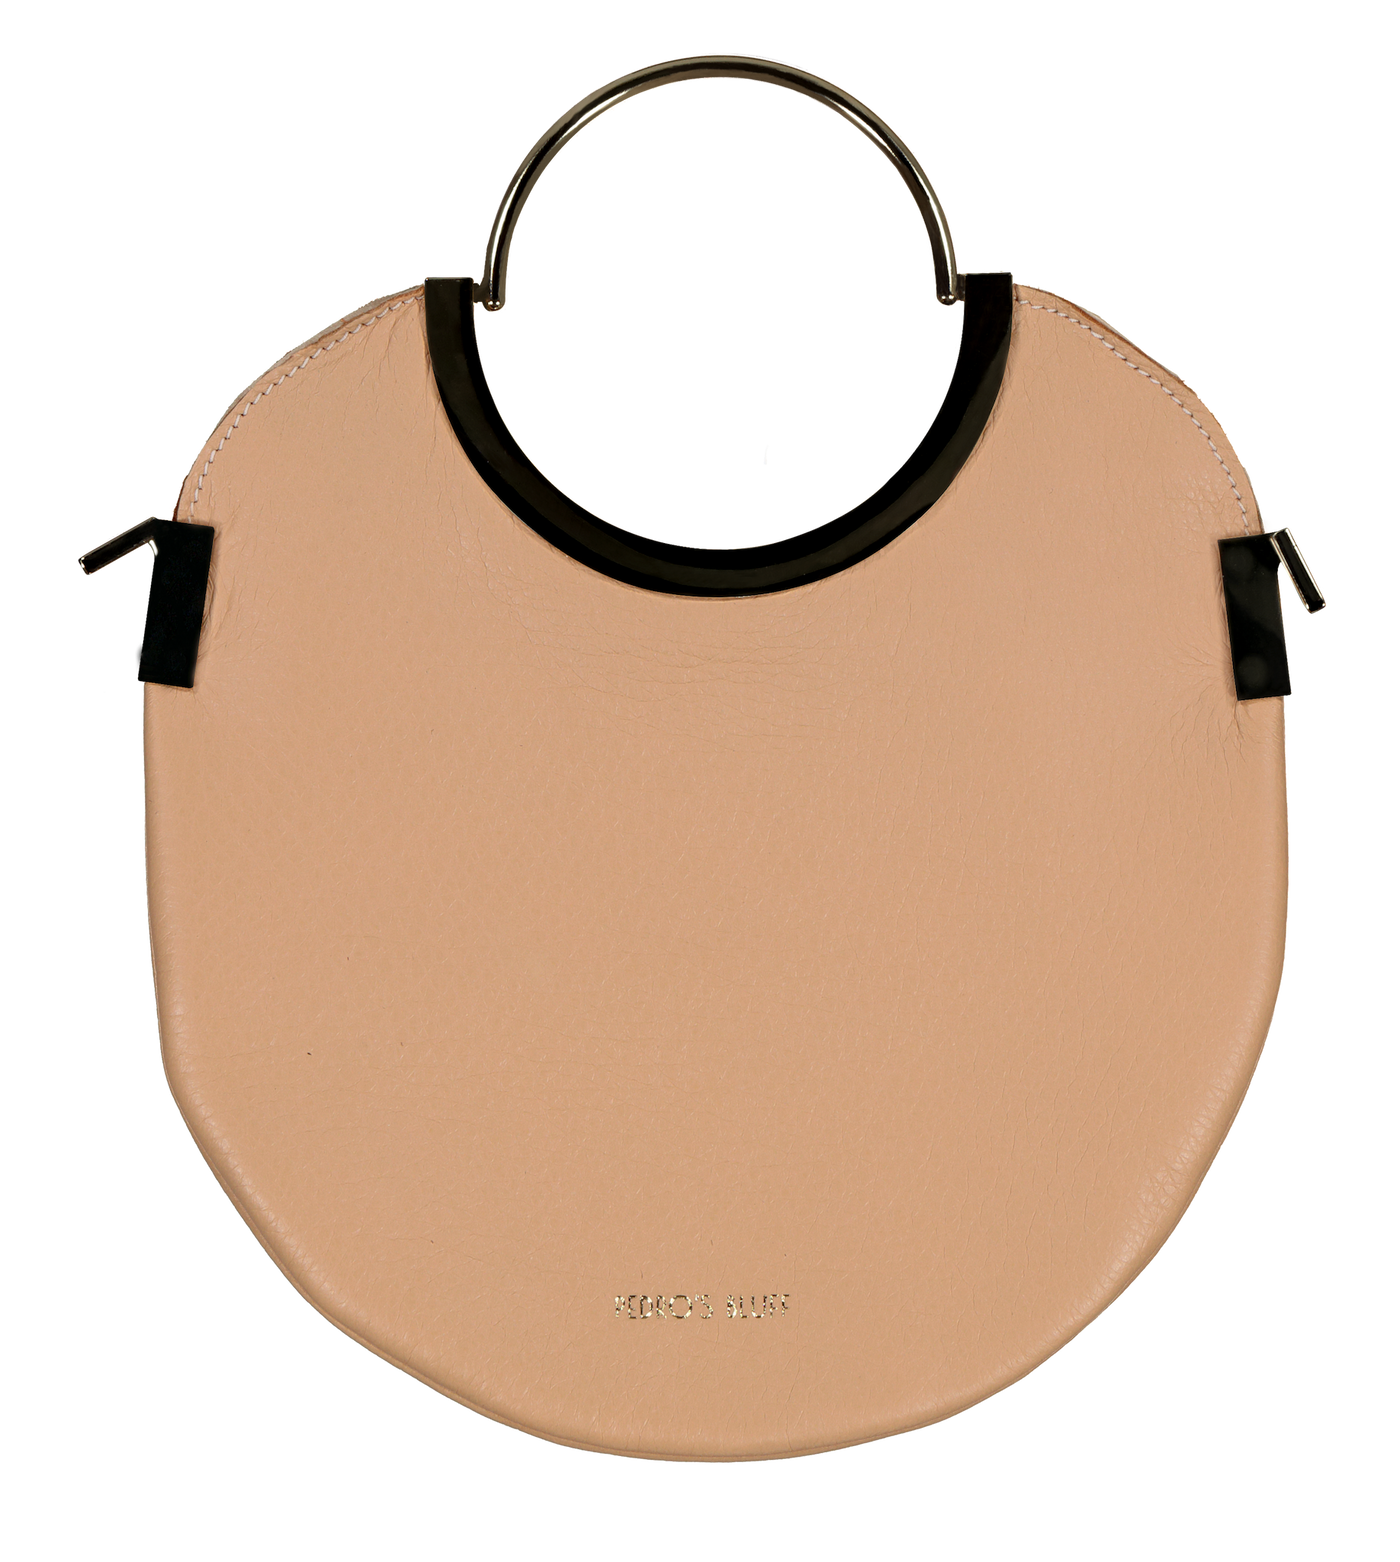 Vongole Circle Tote - Fawn - PEDRO'S BLUFF - New Zealand Leather Bags & Accessories